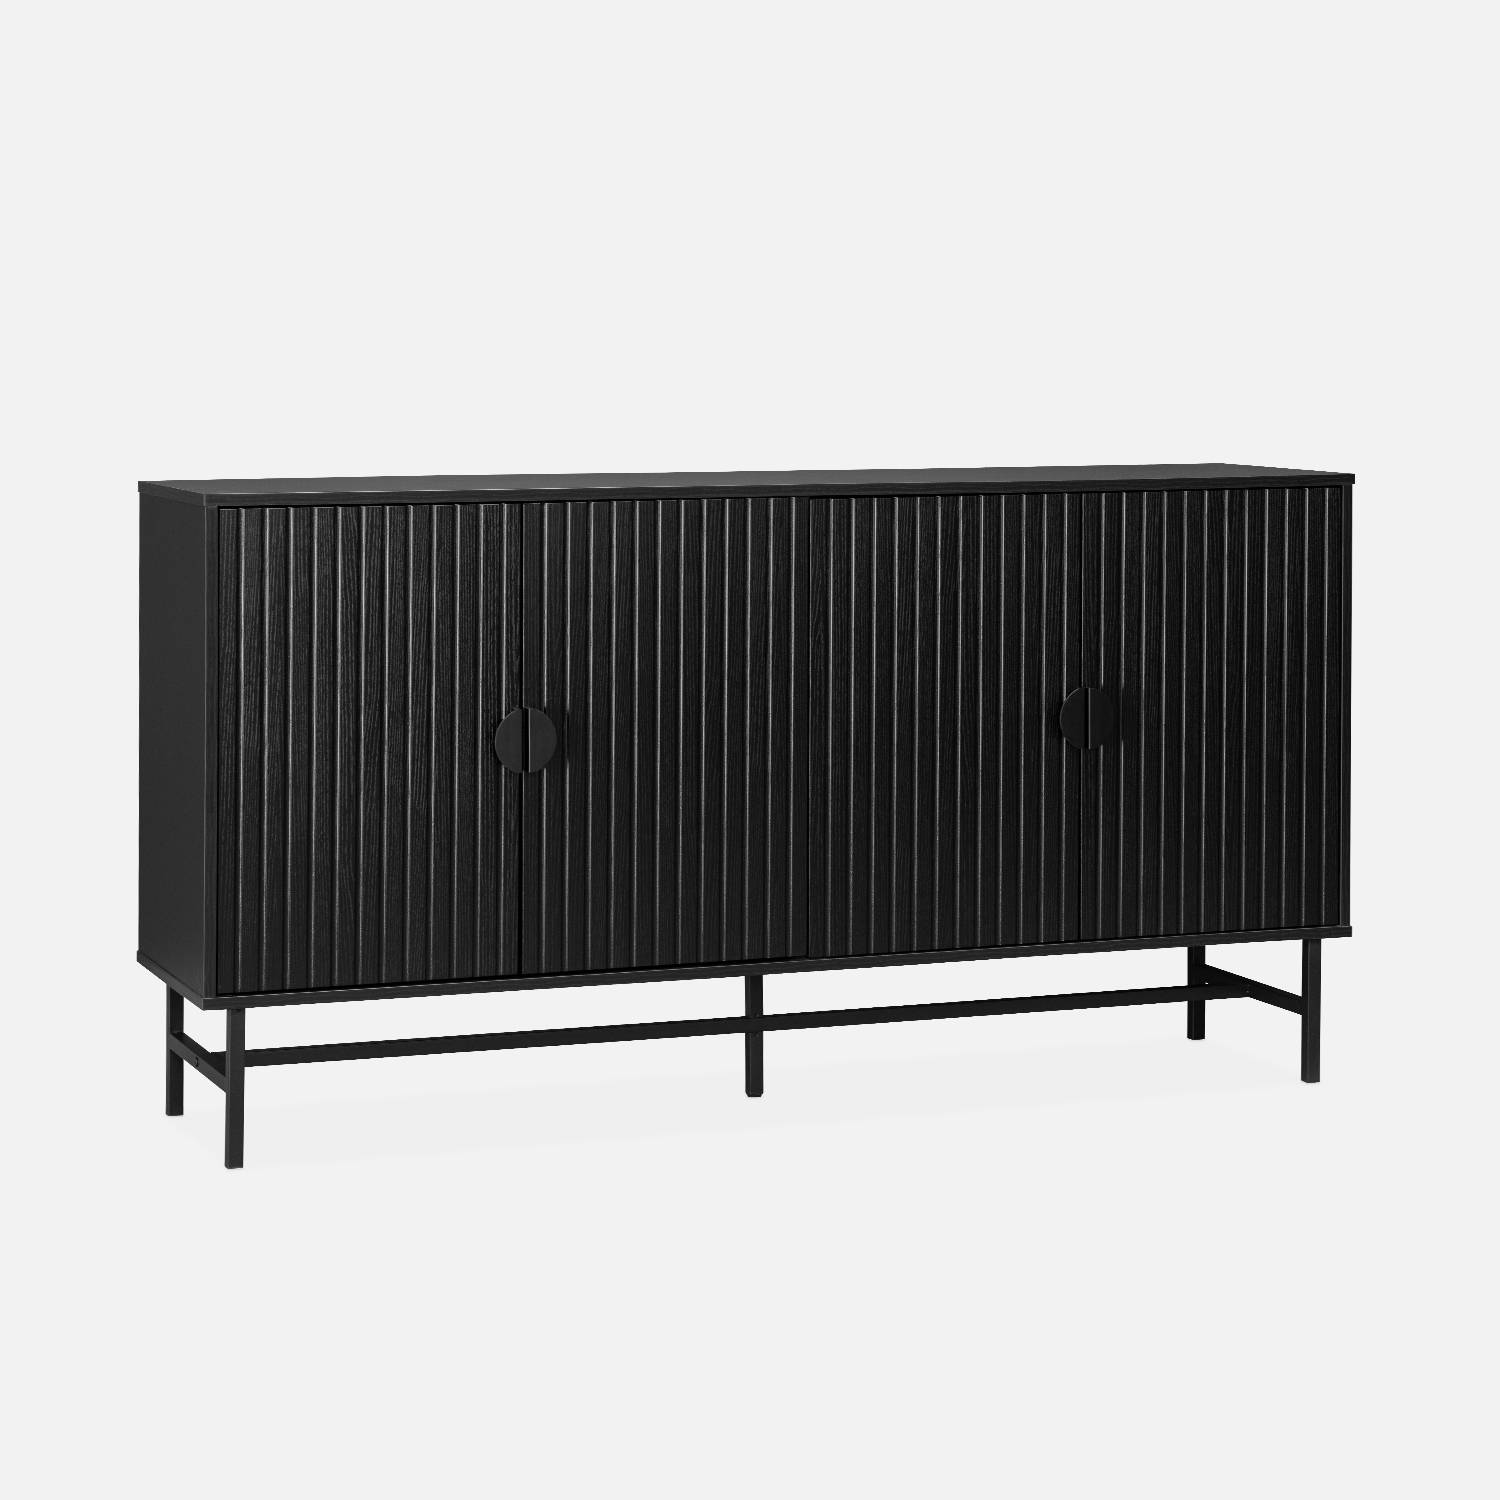 Sideboard cabinet with two doors and one shelf, ridged effect, industrial style, 157.5x39x83cm, Black | sweeek